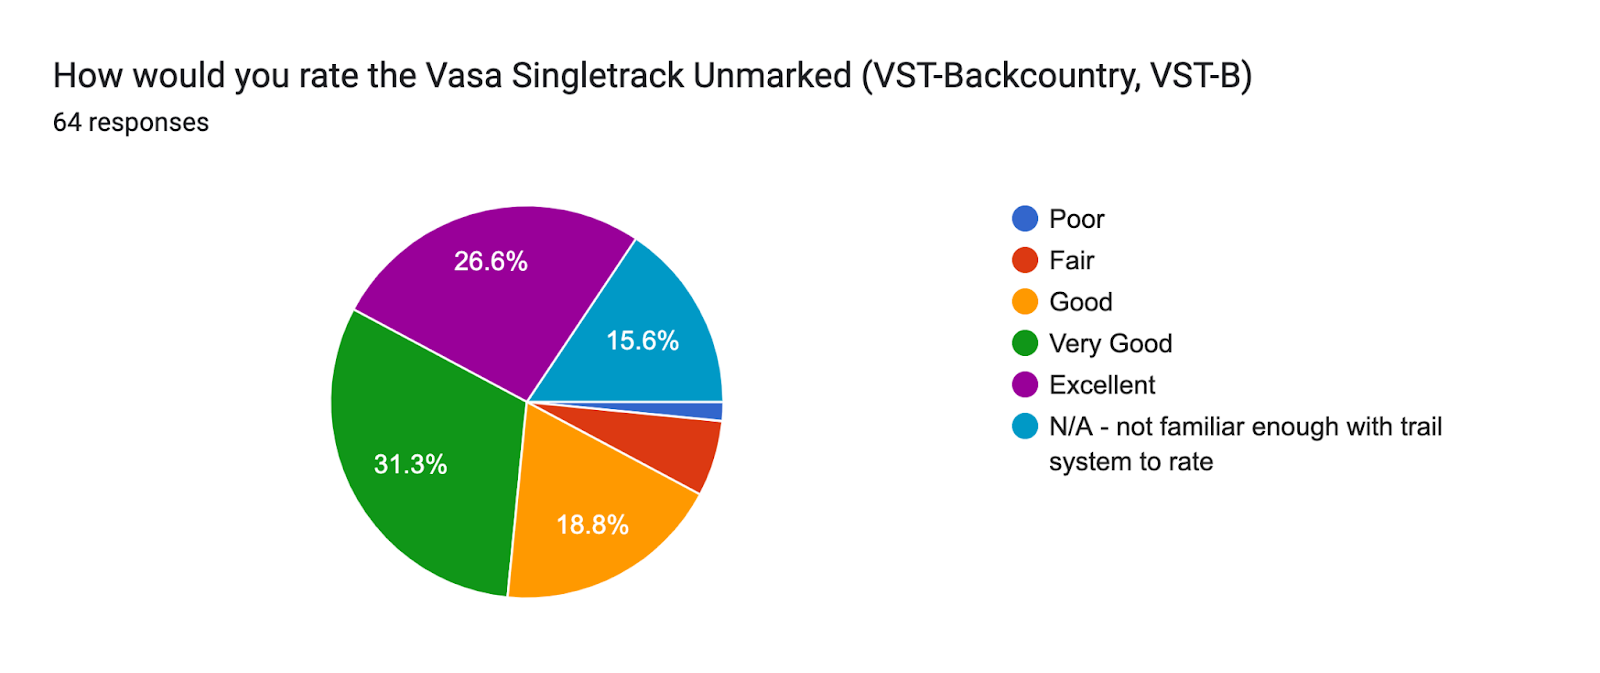 Forms response chart. Question title: How would you rate the Vasa Singletrack Unmarked (VST-Backcountry, VST-B). Number of responses: 64 responses.